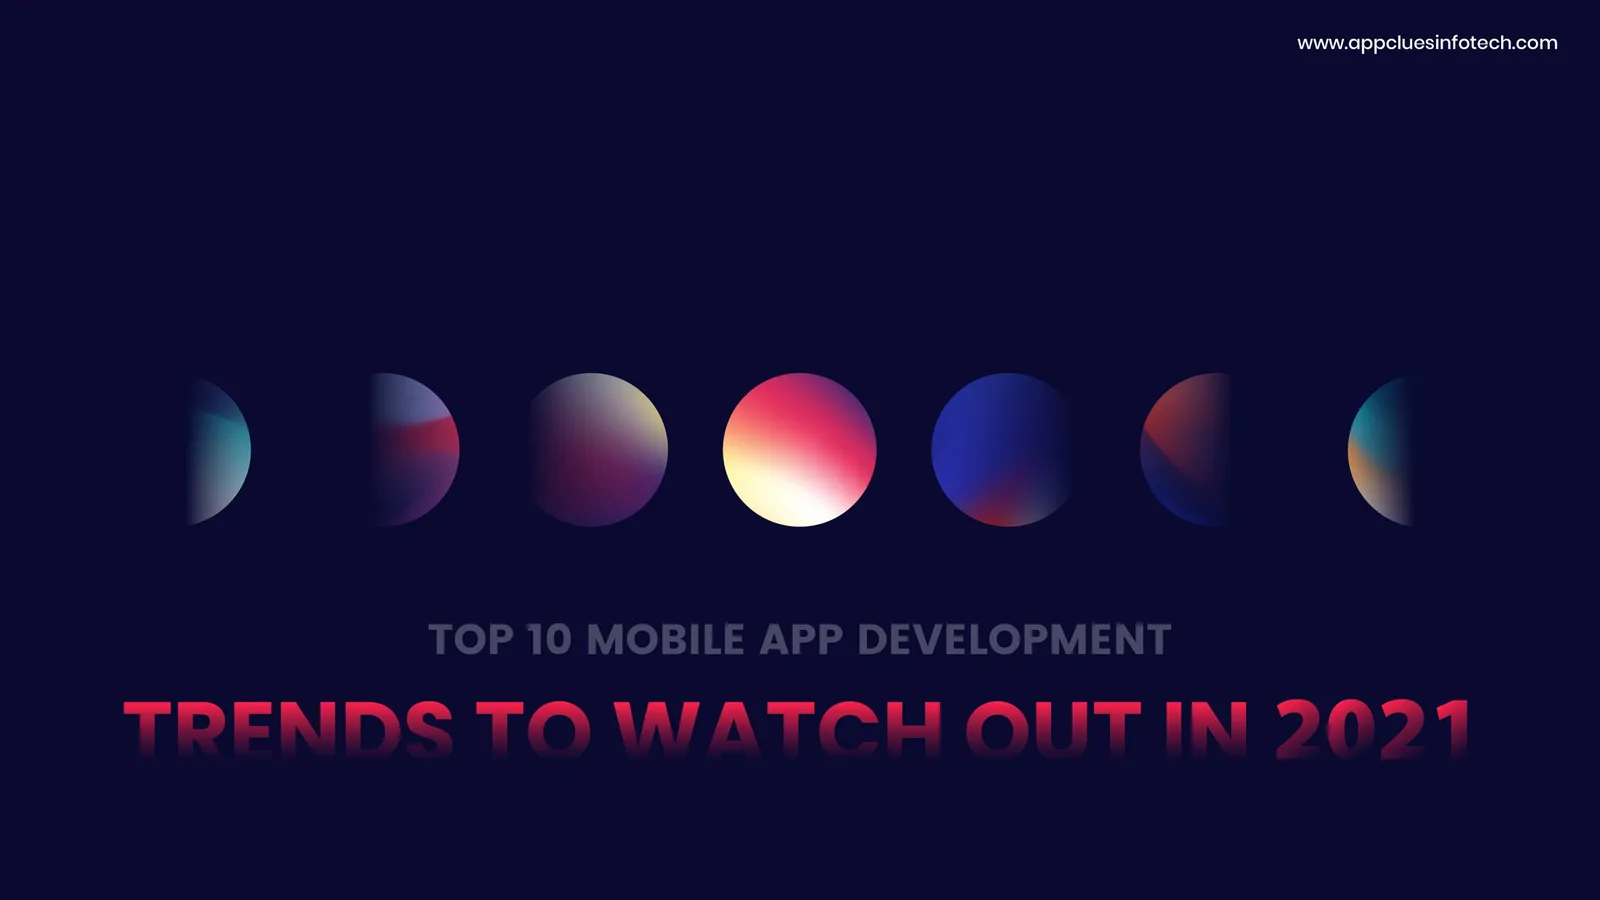 Top Mobile App Development Trends To Watch Out in 2021